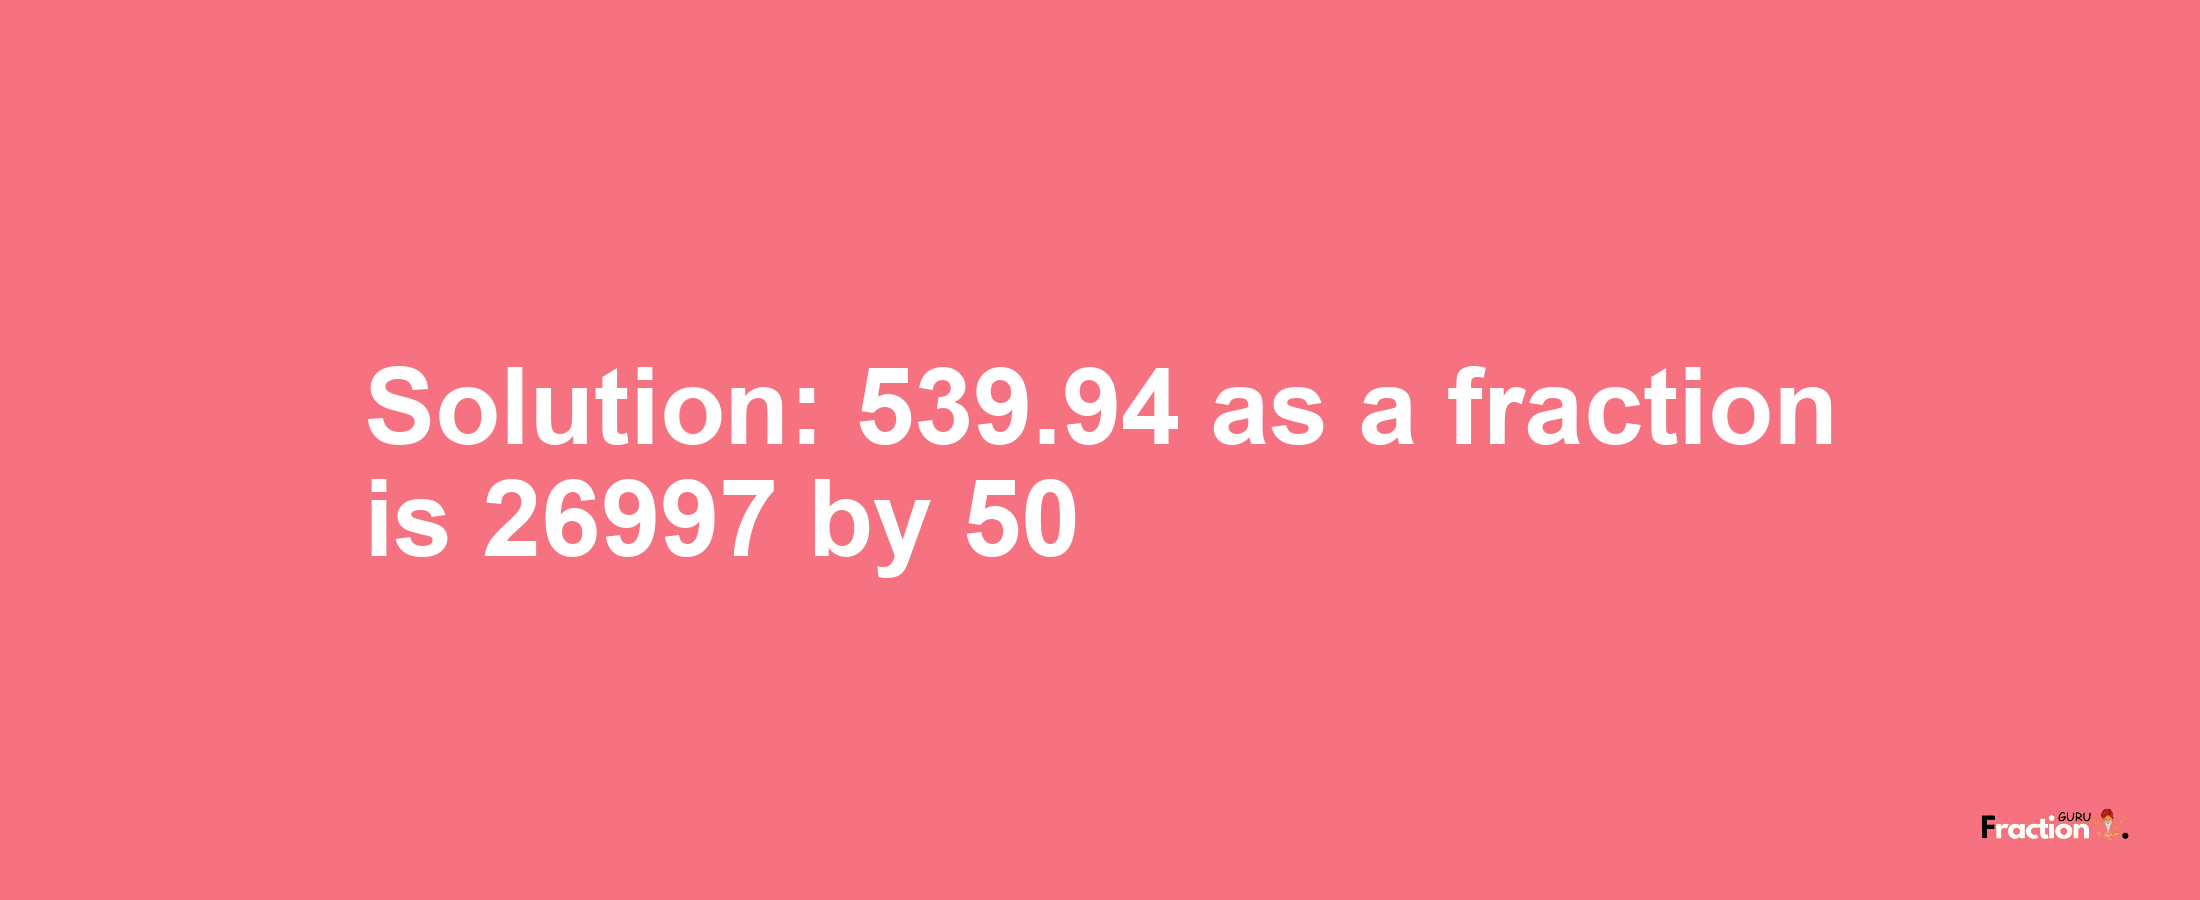 Solution:539.94 as a fraction is 26997/50